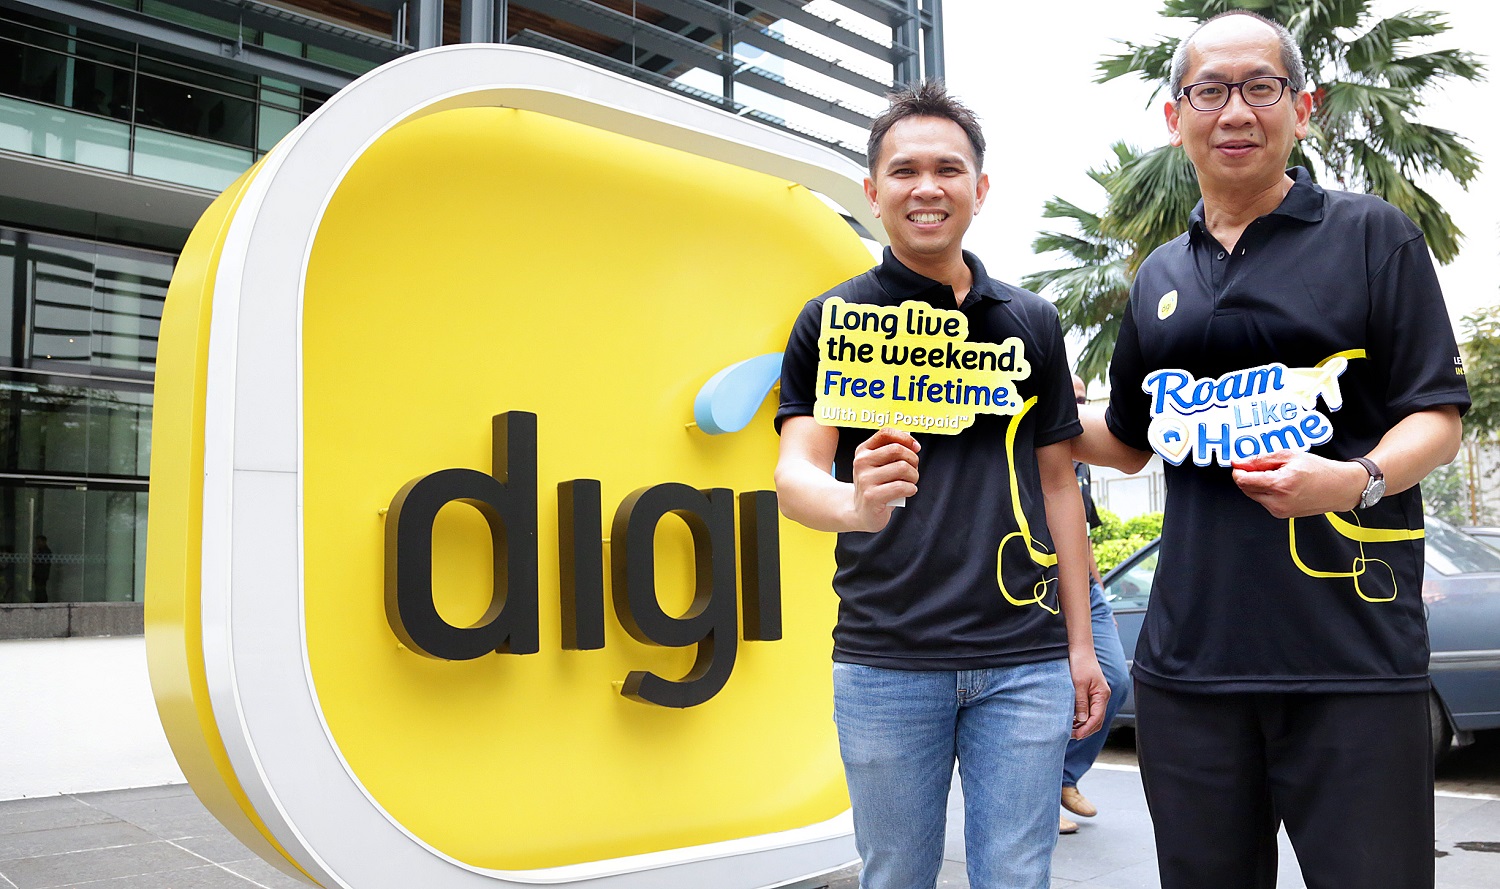 Digi offers seamless and worry-free international roaming in Singapore